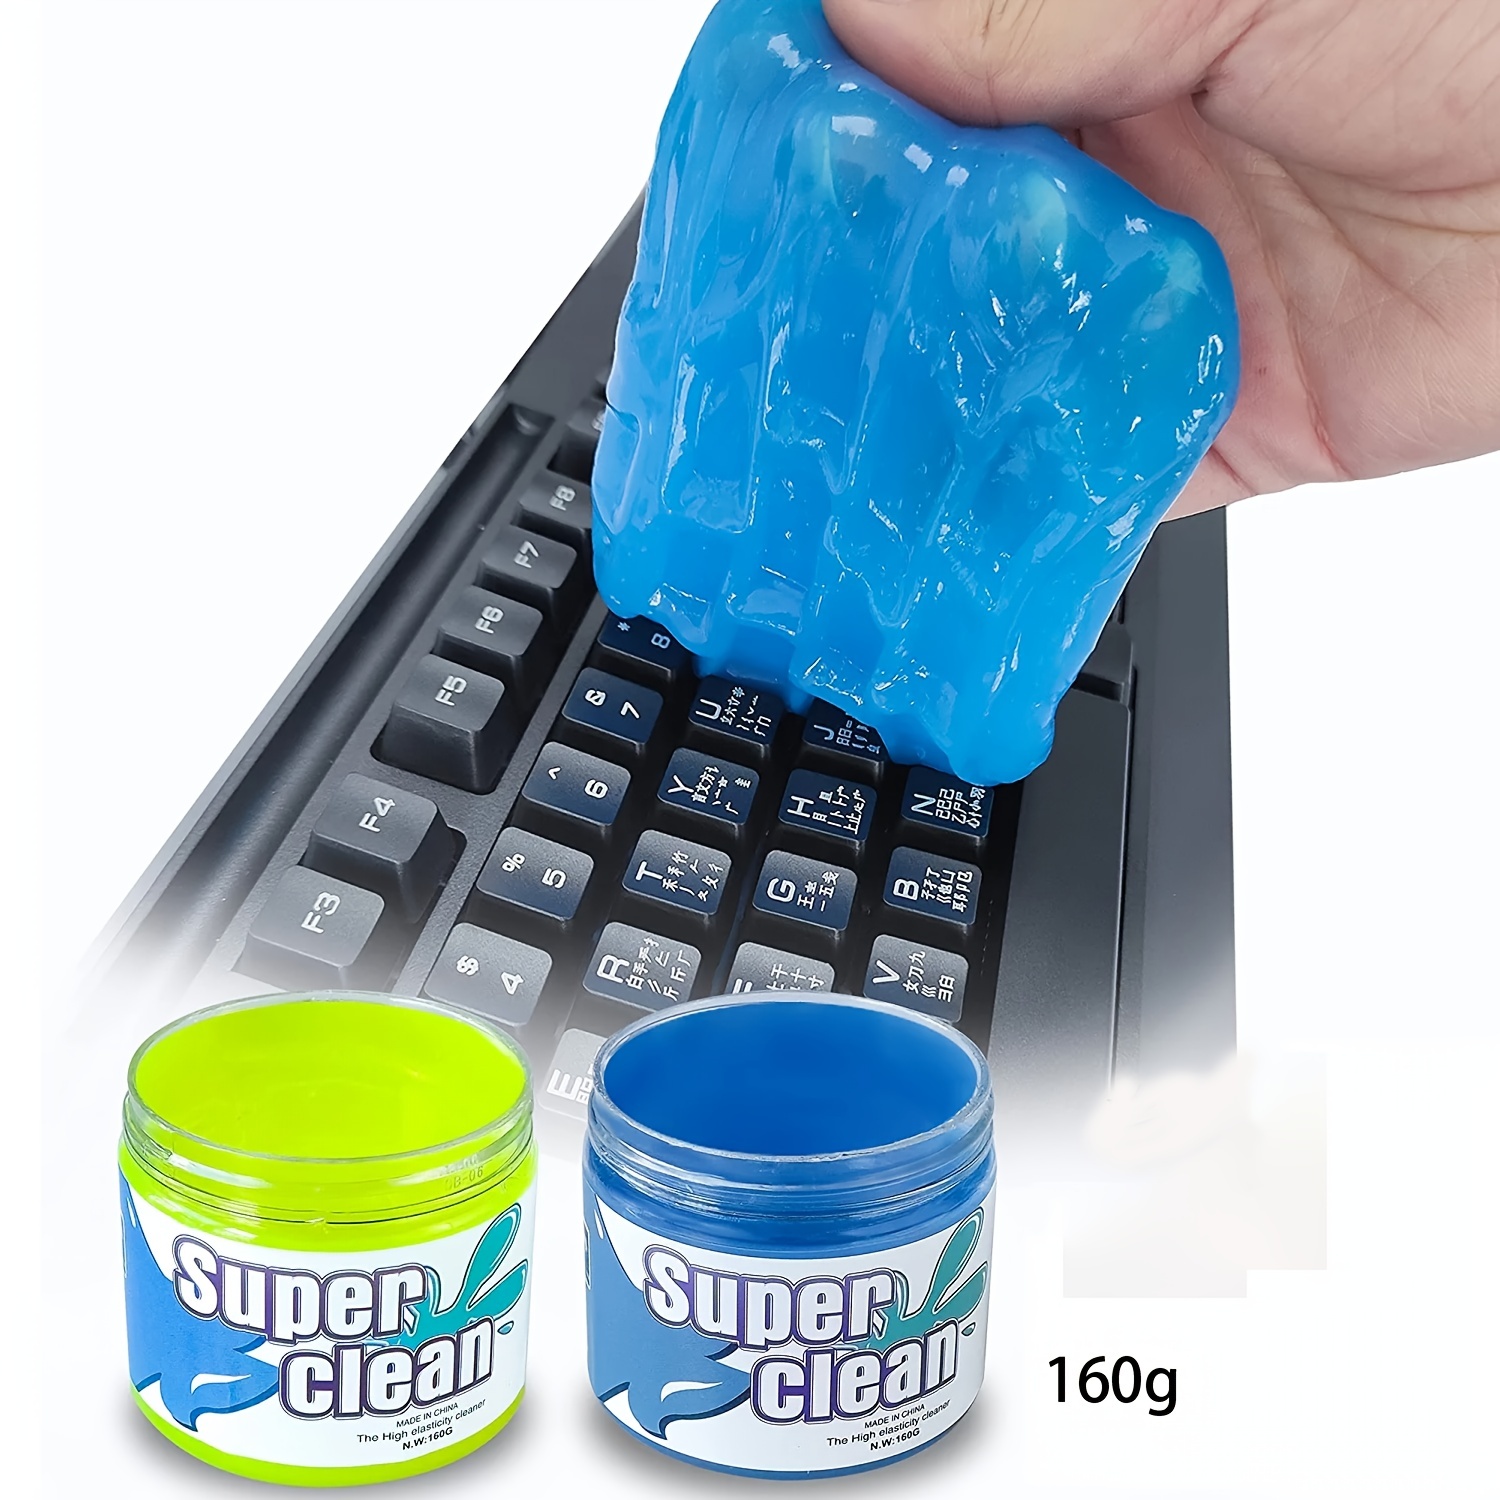 Haussimple Car Cleaning Gel for Detailing Car Vent Cleaning Putty for PC Laptop Keyboard - 4 Pack, Blue